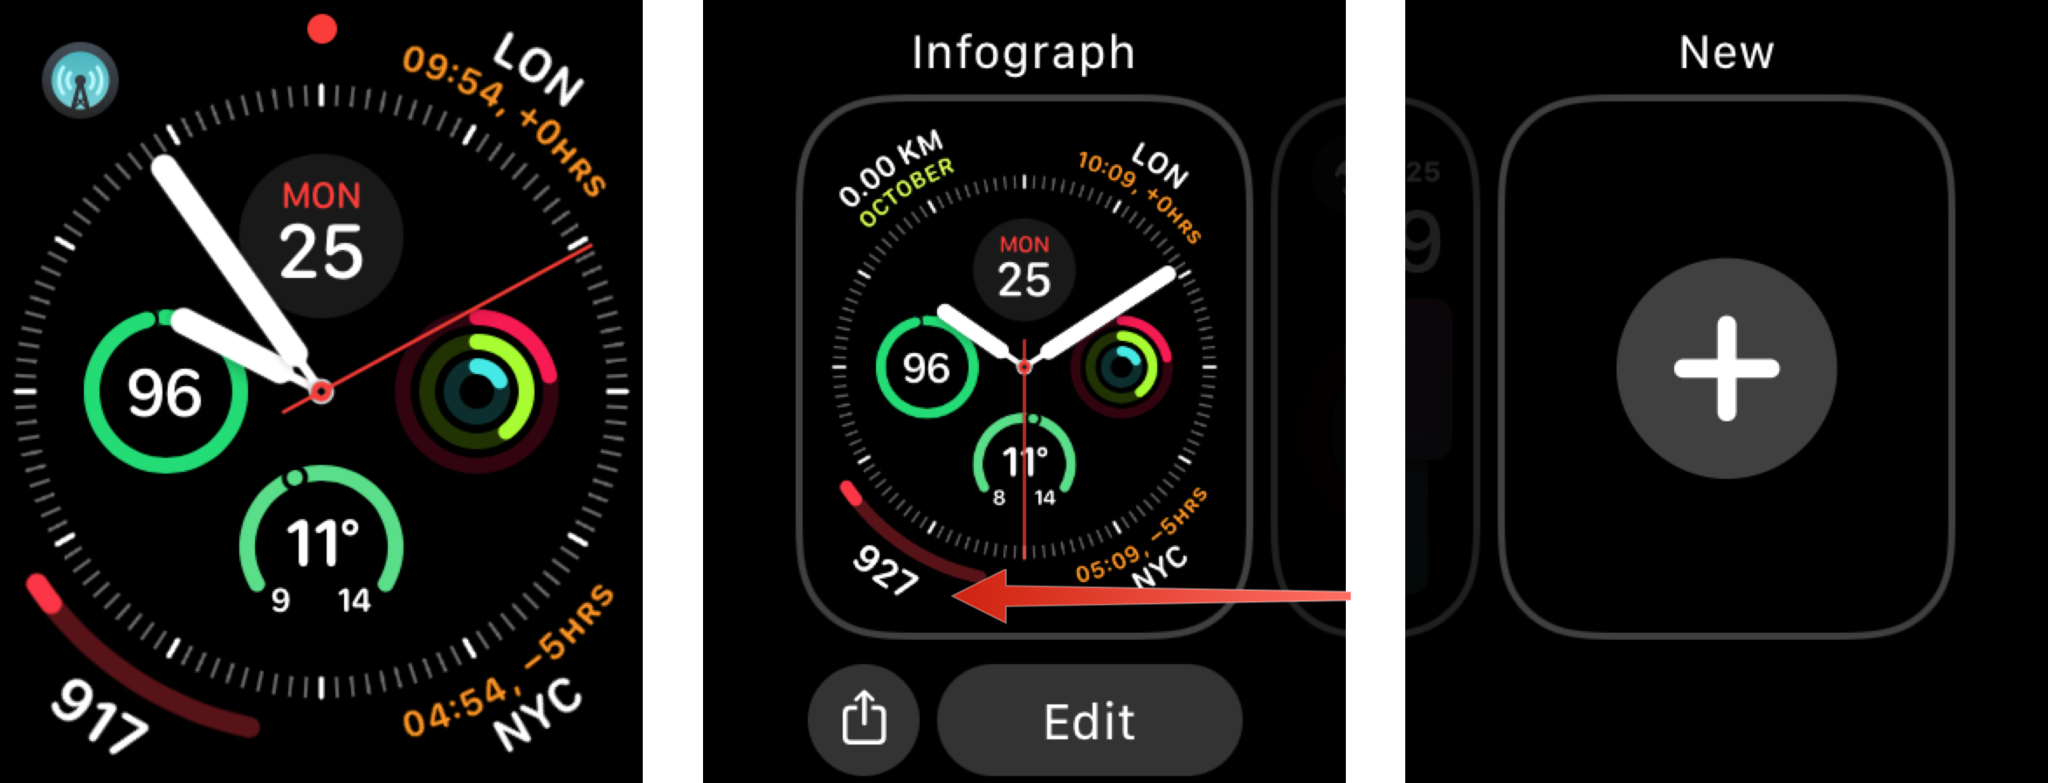 Add Watch Face via Apple Watch: Long press on watch face, swipe from right to left, tap on New.